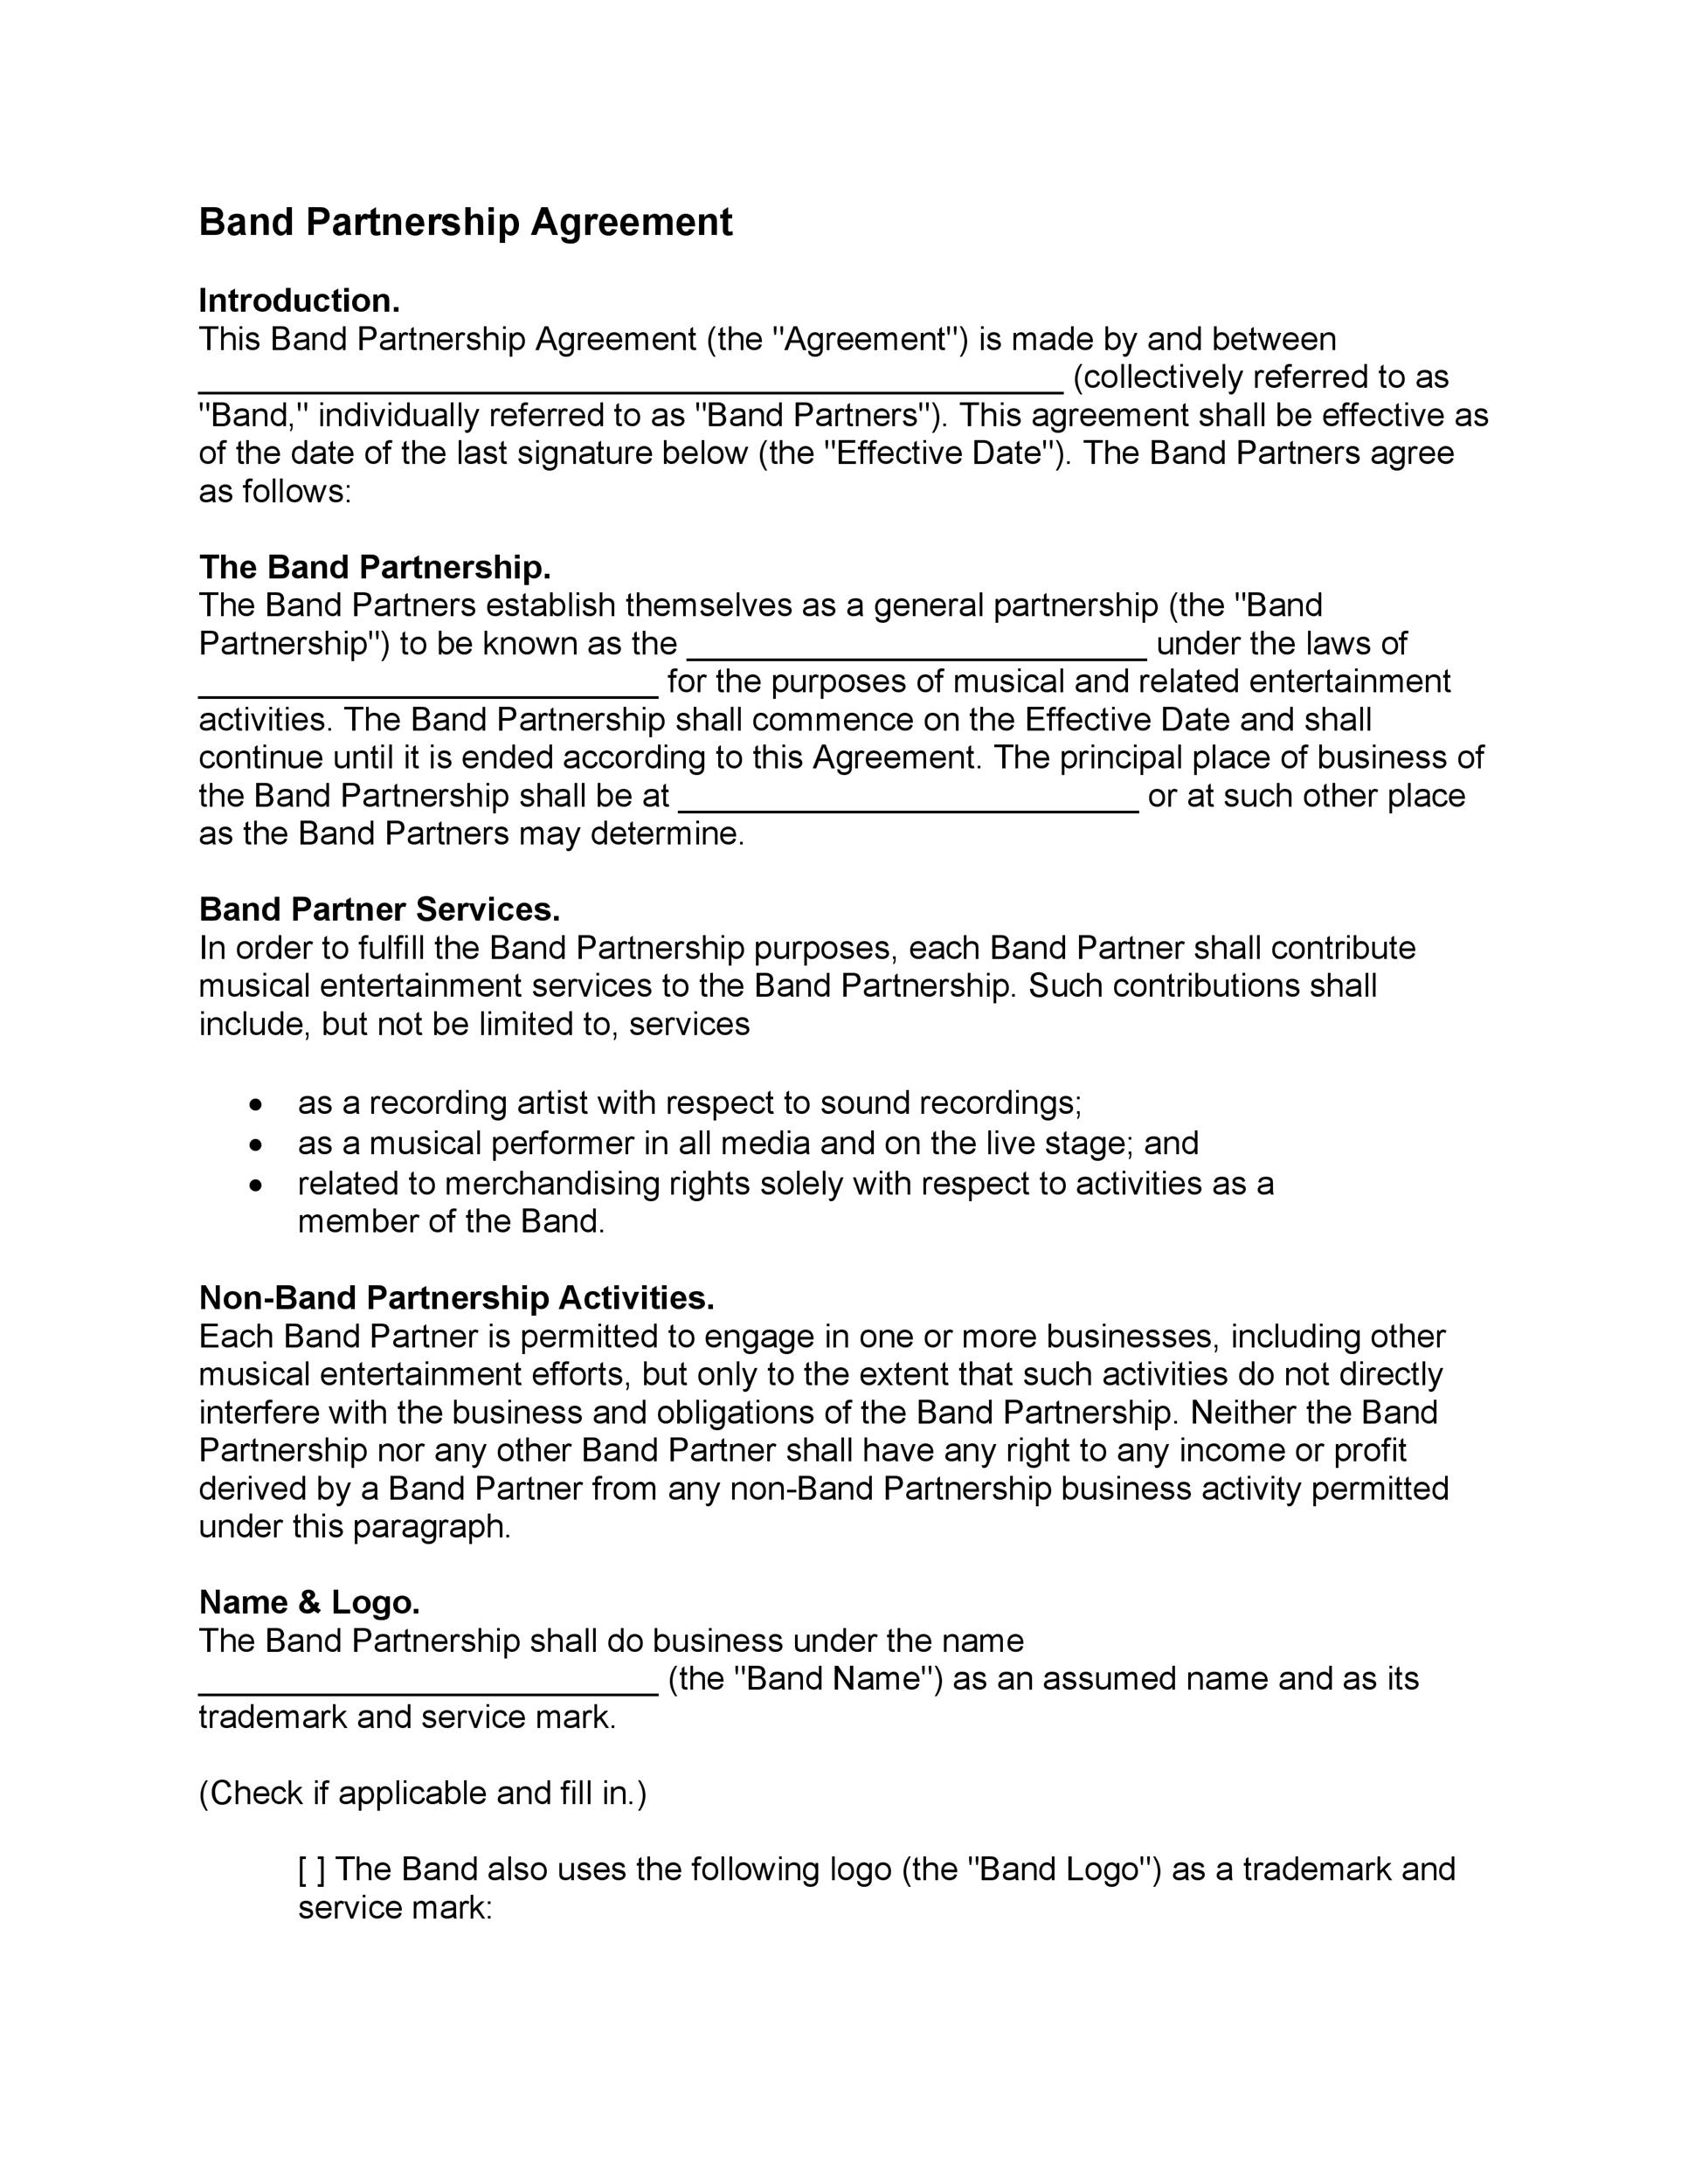 40  FREE Partnership Agreement Templates (Business General)